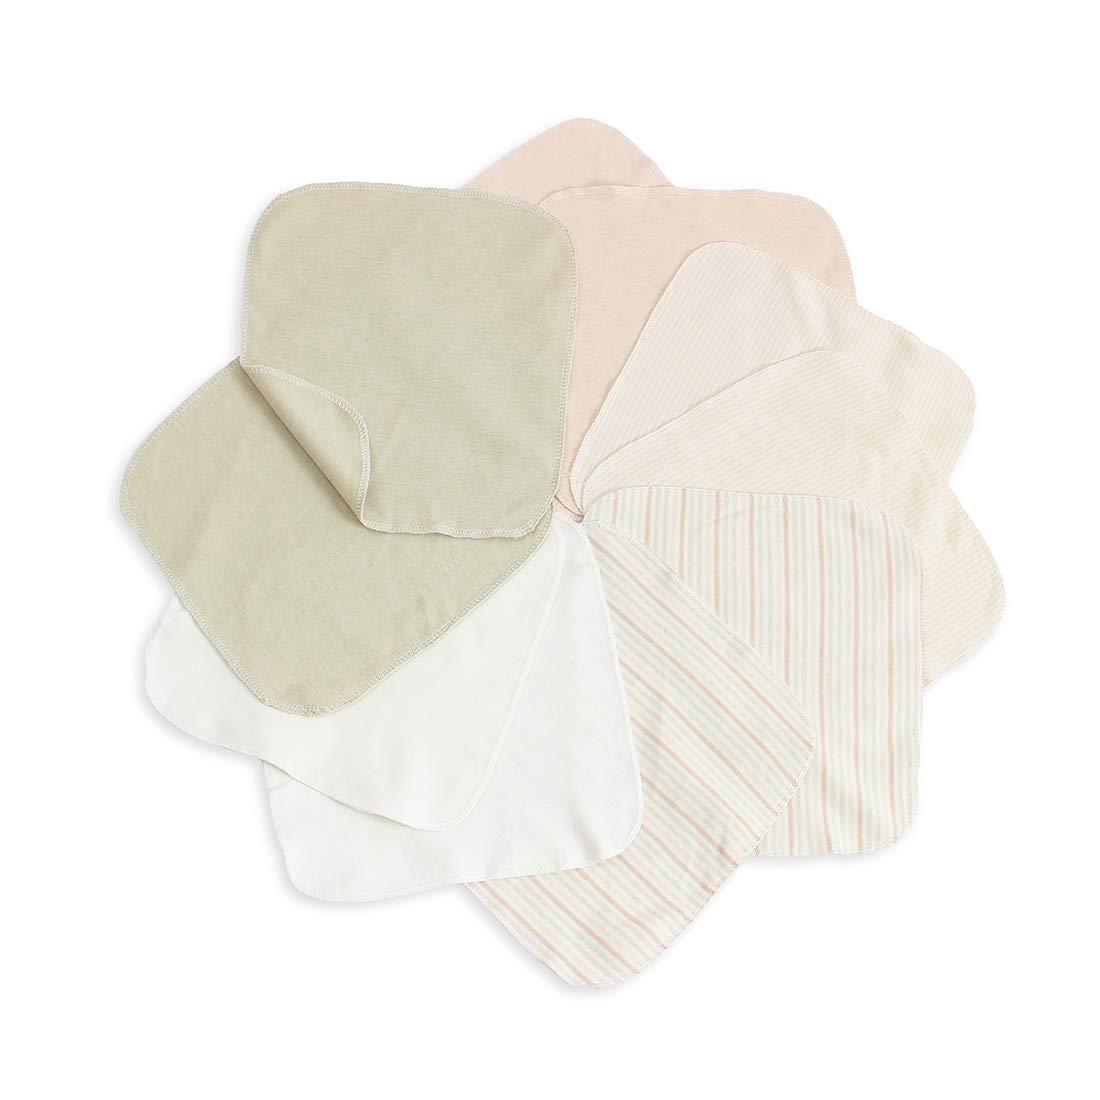 Reusable Colo Washable Saliva Towel Face Wipes, Newborn Bath Face Towel, Natural Baby Wipes for Sensitive Skin